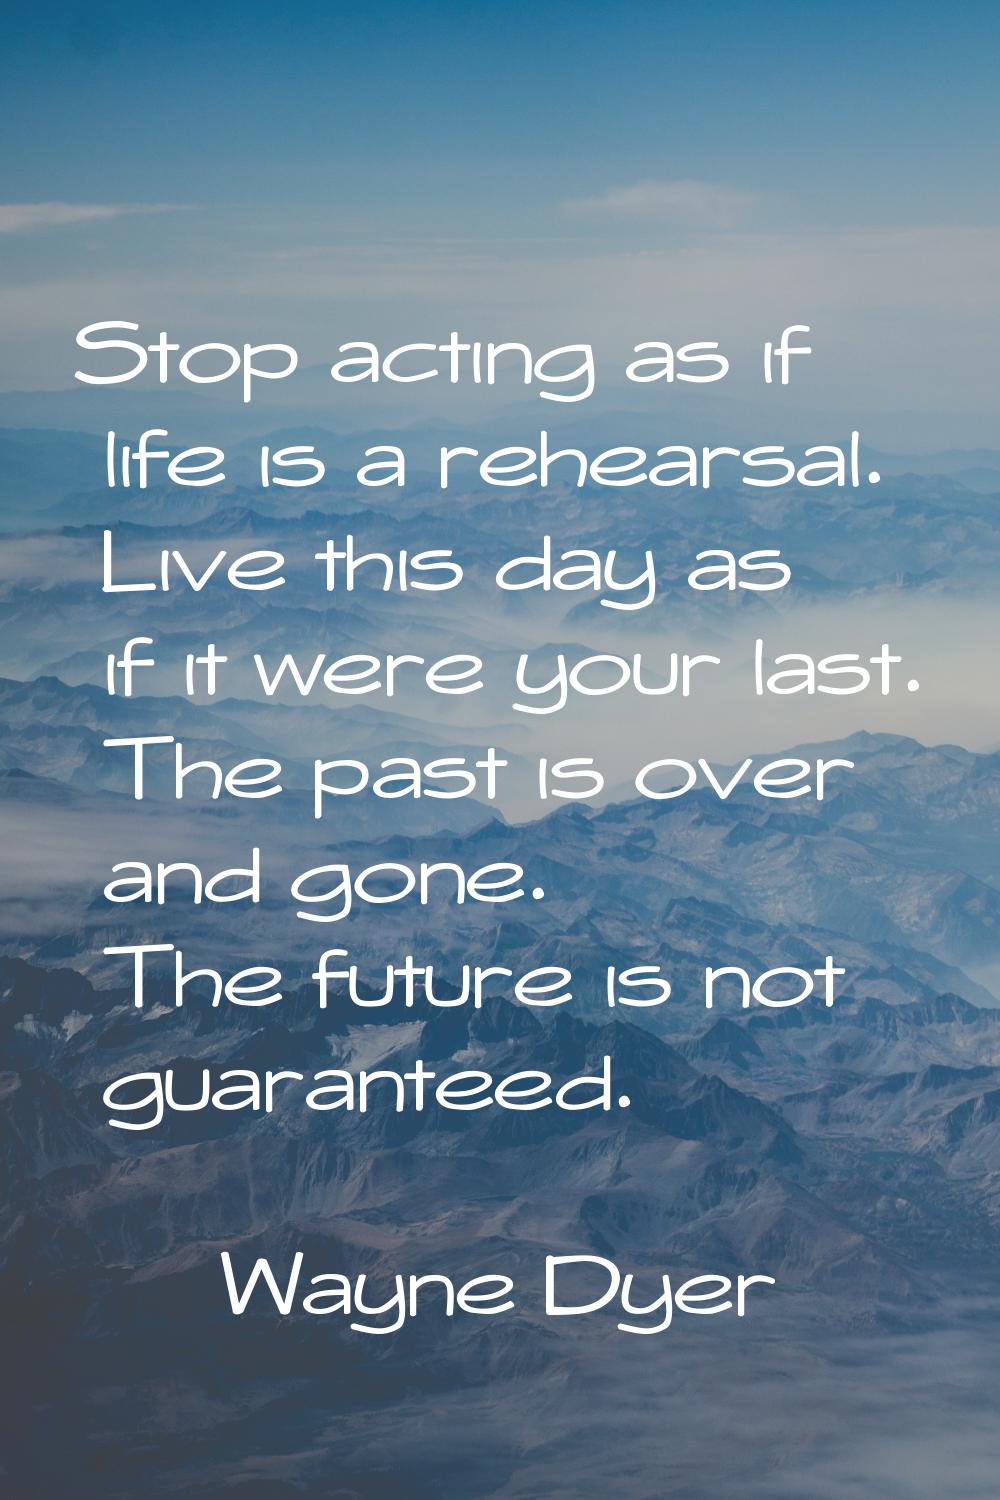 Stop acting as if life is a rehearsal. Live this day as if it were your last. The past is over and 